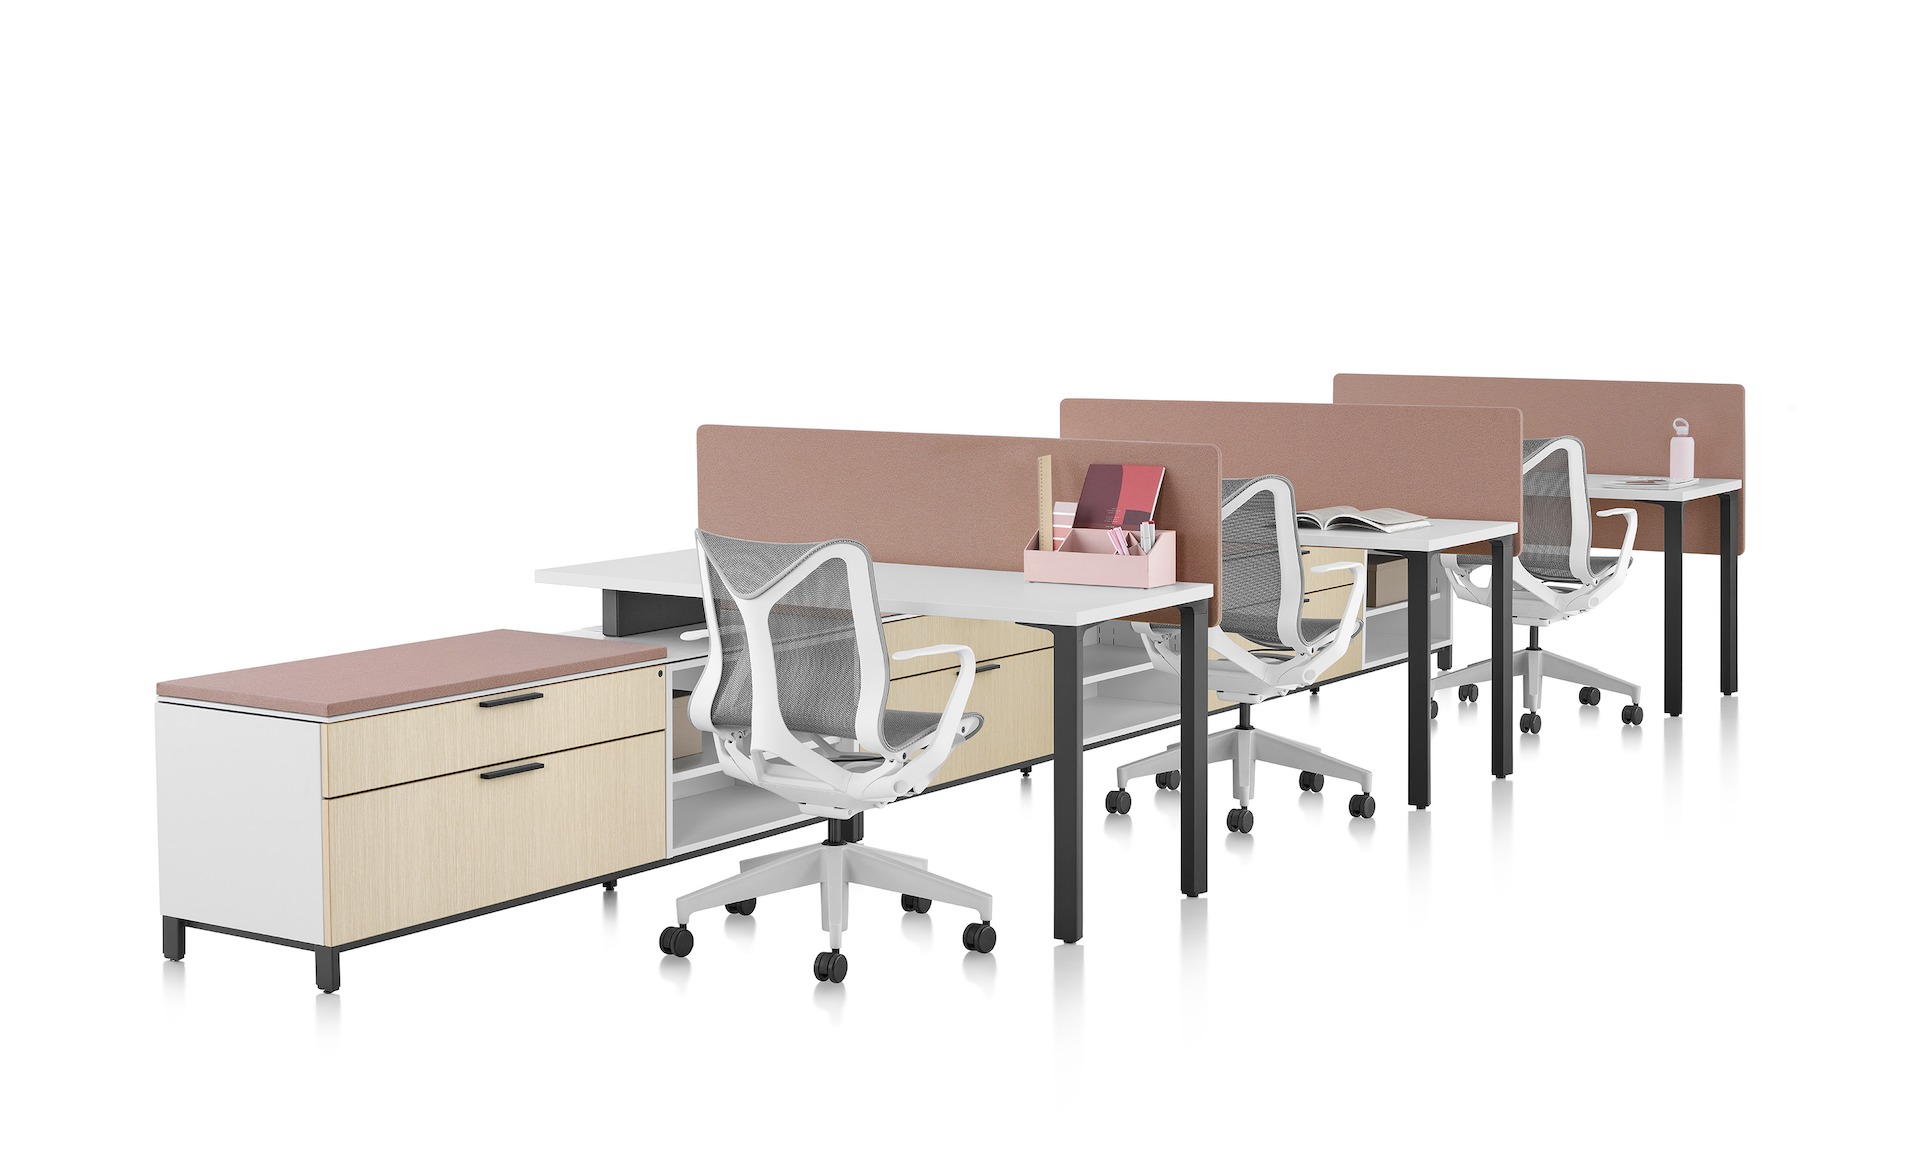 3-pack Canvas Storage workstation with white surfaces, pink screens, and grey Cosm chairs.